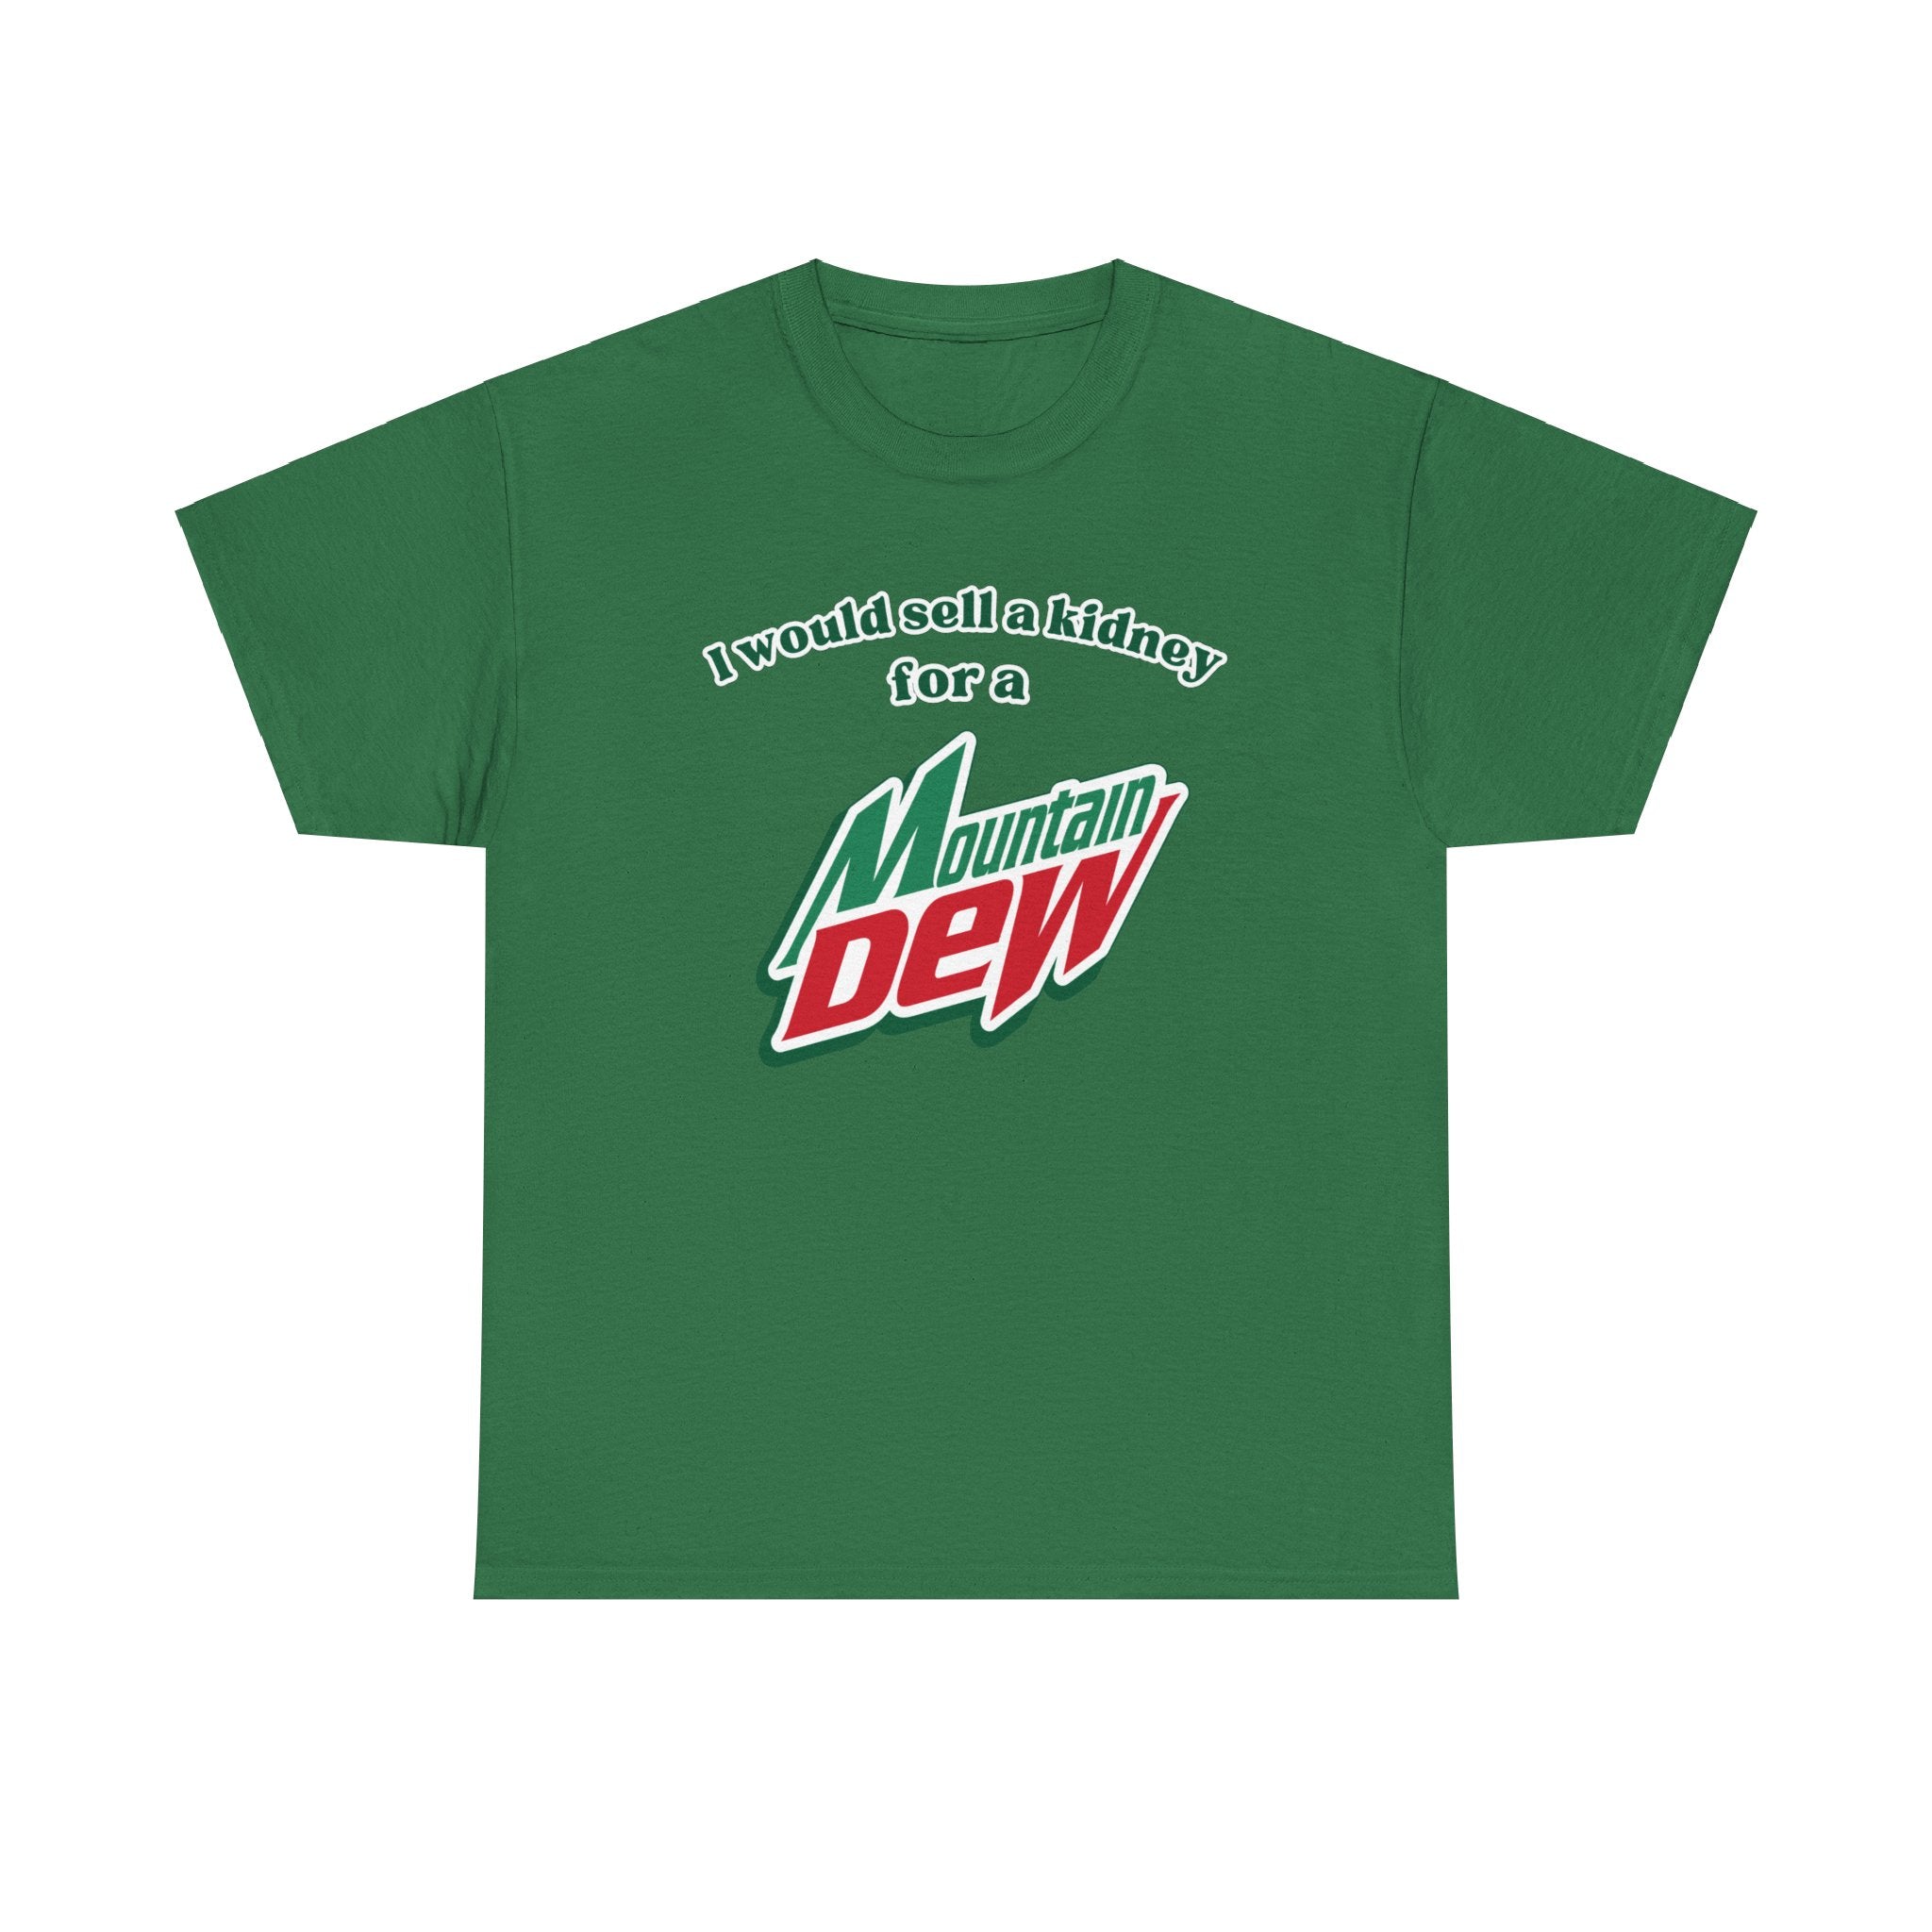 I Would Sell a Kidney for a Mountain Dew